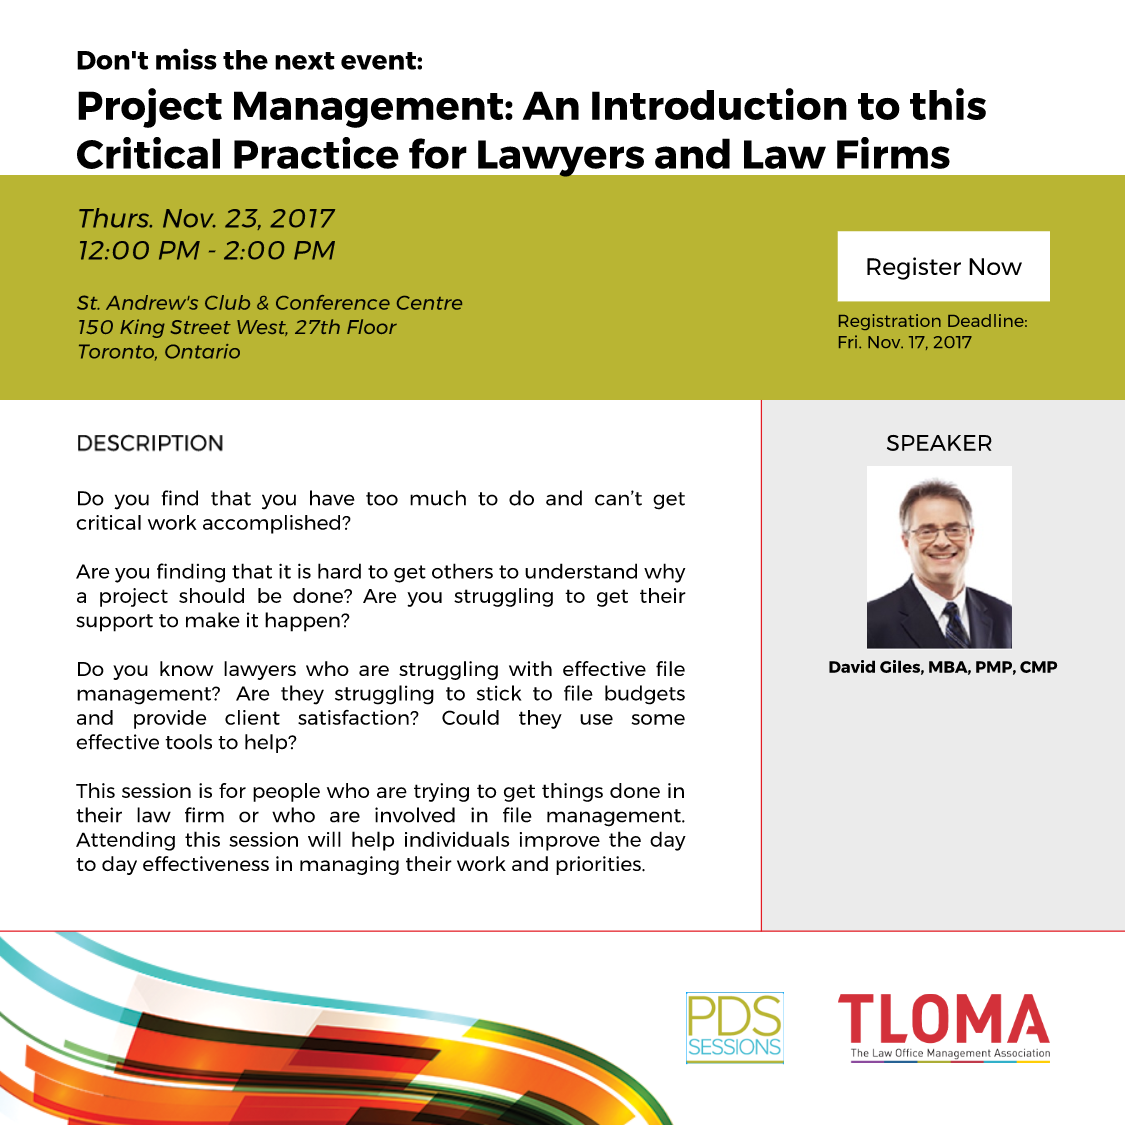 Project Management: An Introduction to this Critical Practice for Lawyers and Law Firms